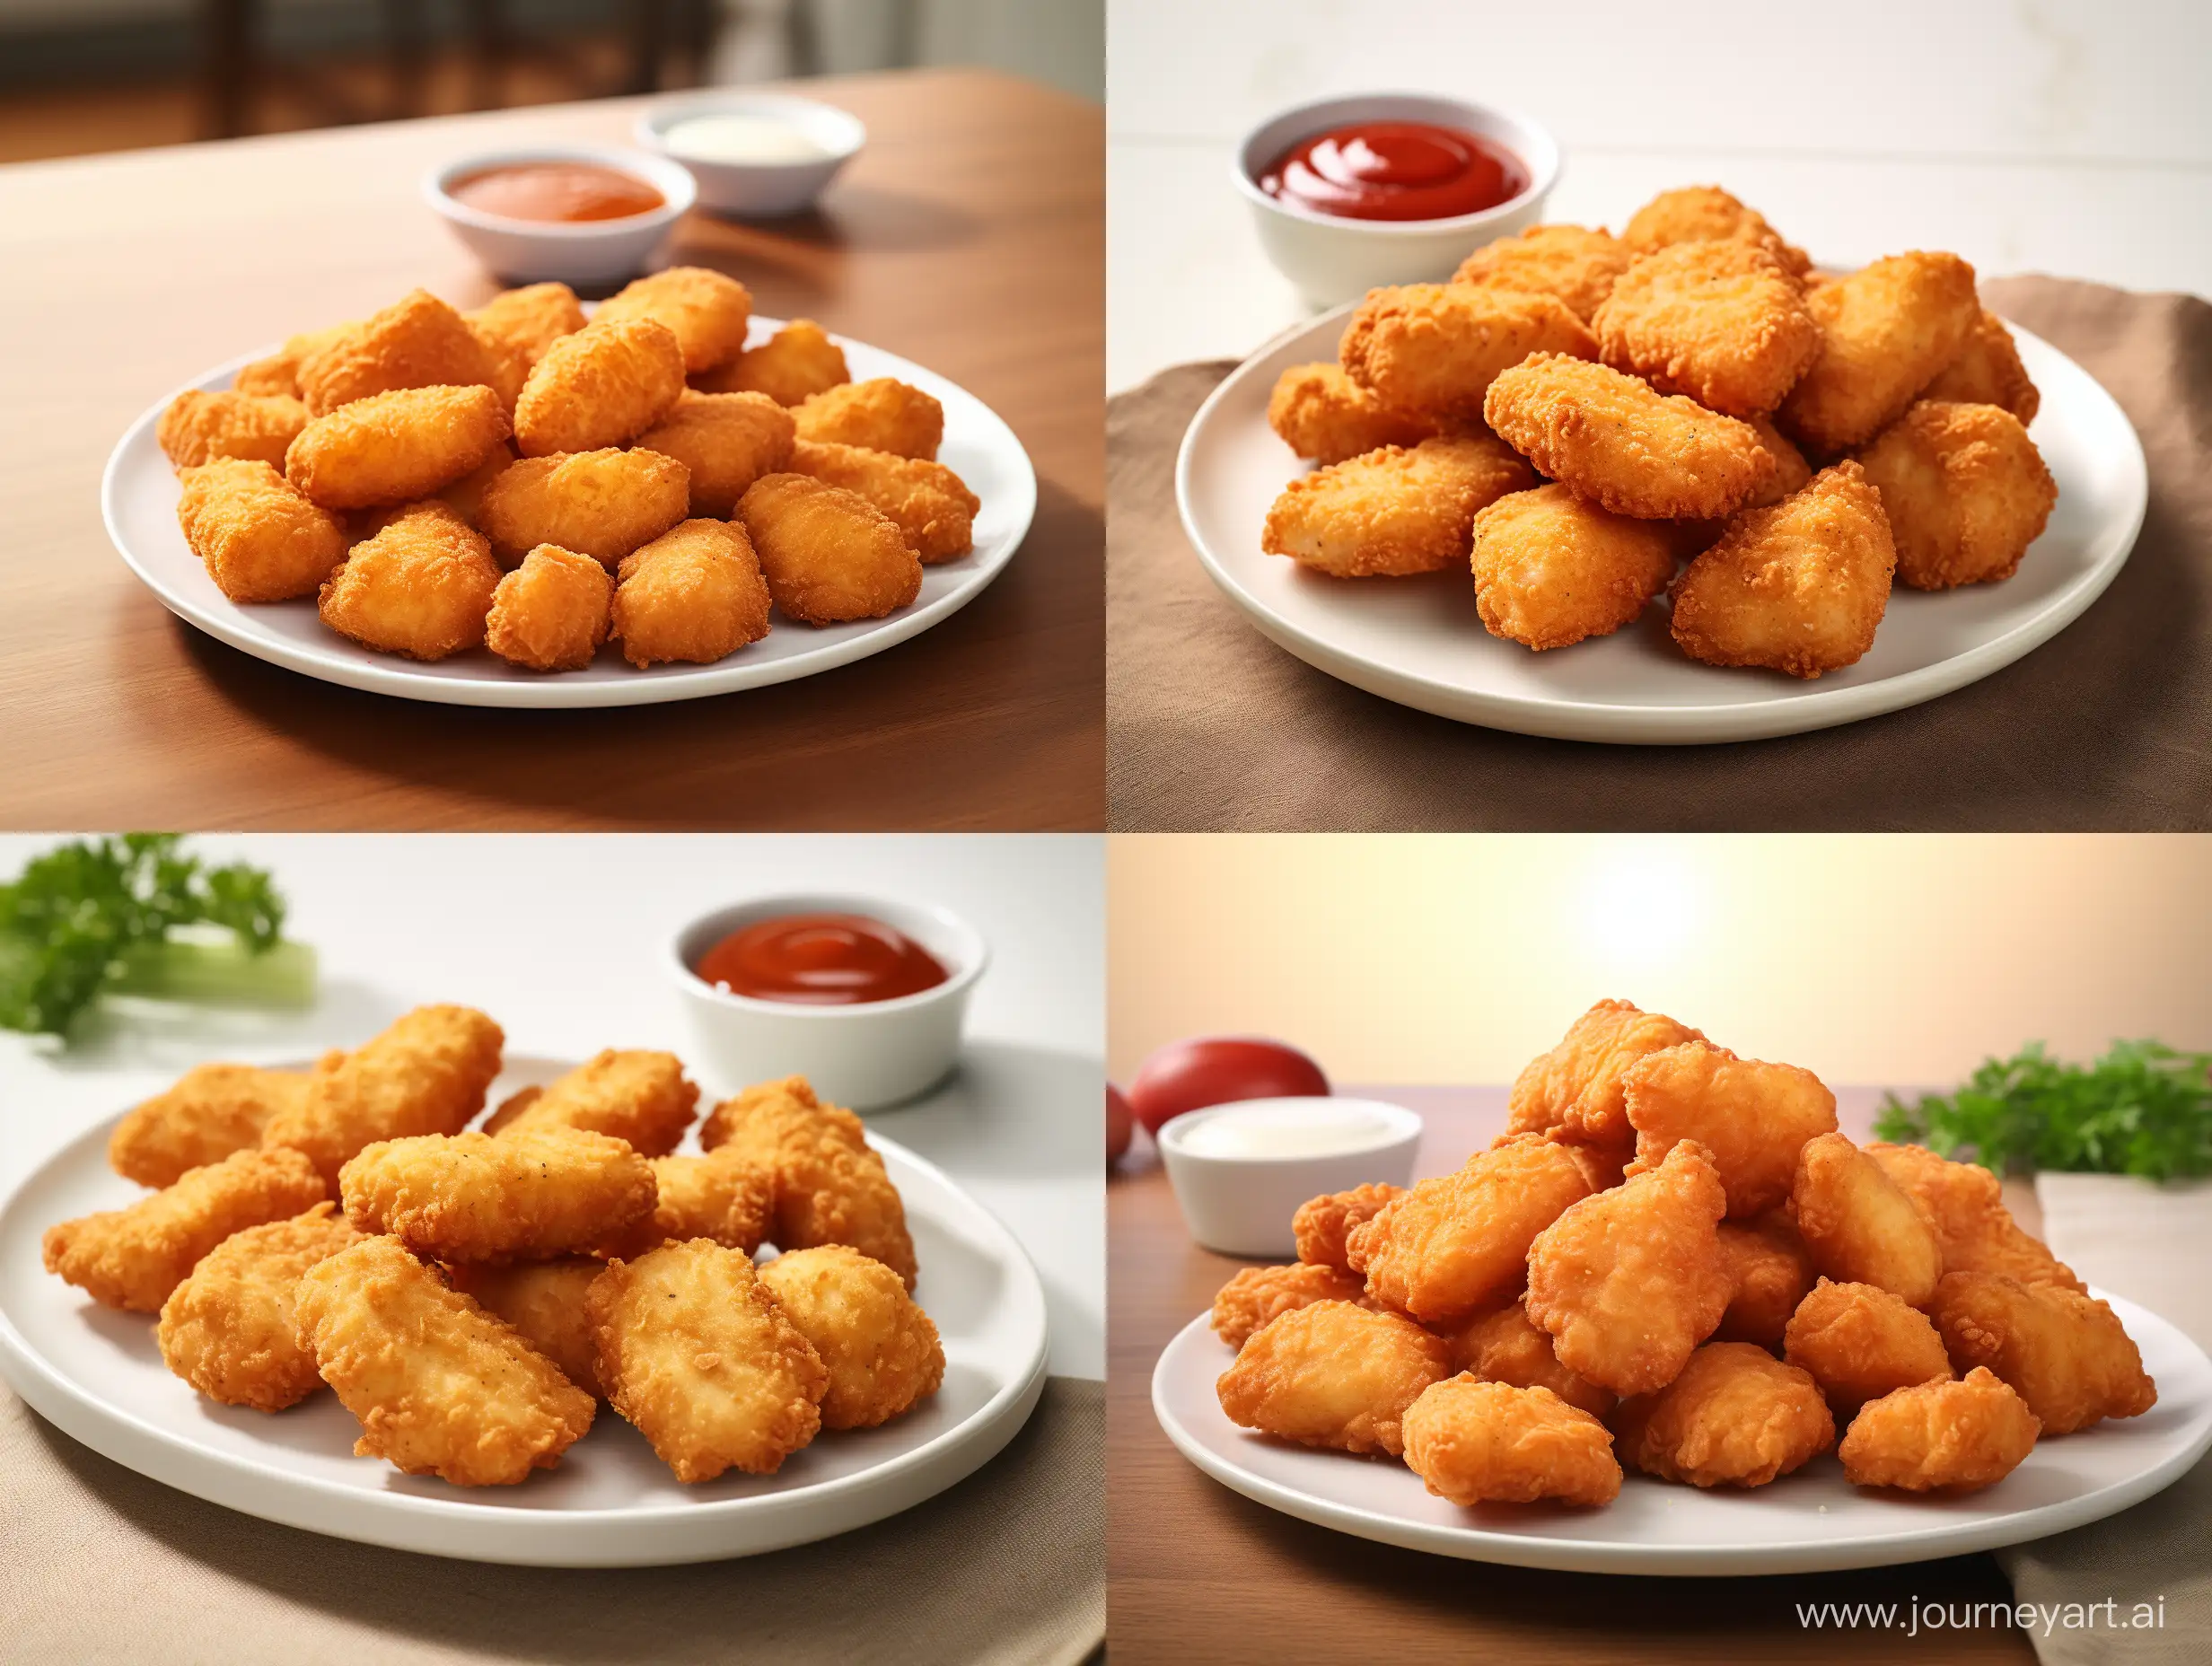 Delicious-Chicken-Nuggets-on-a-White-Plate-Studio-Shot